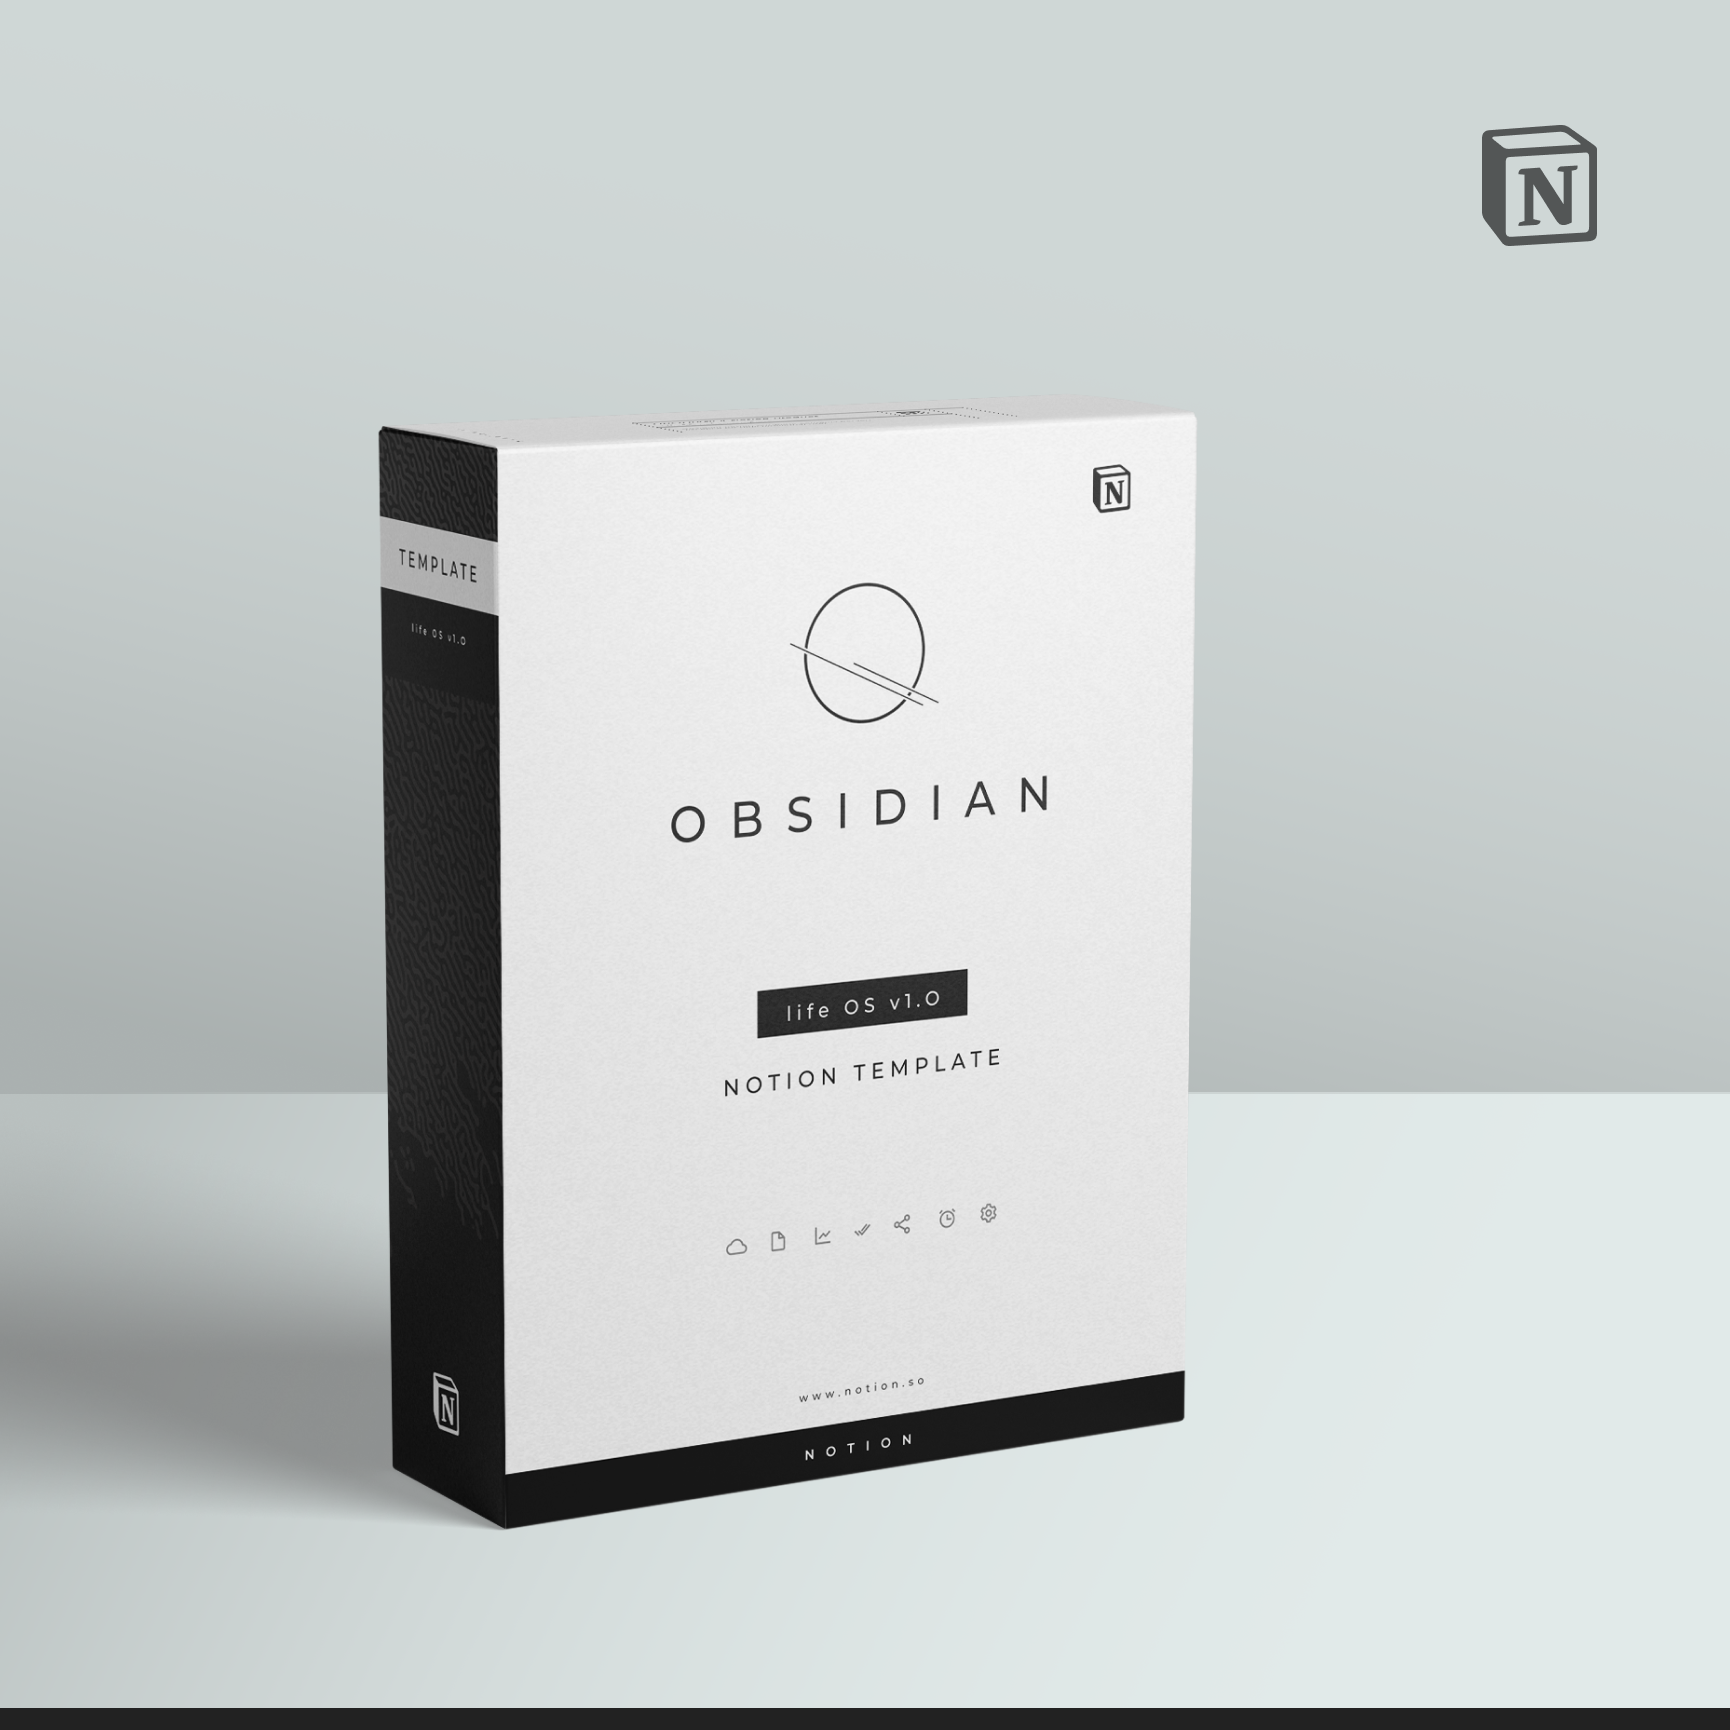 Obsidian Life OS : Notion template